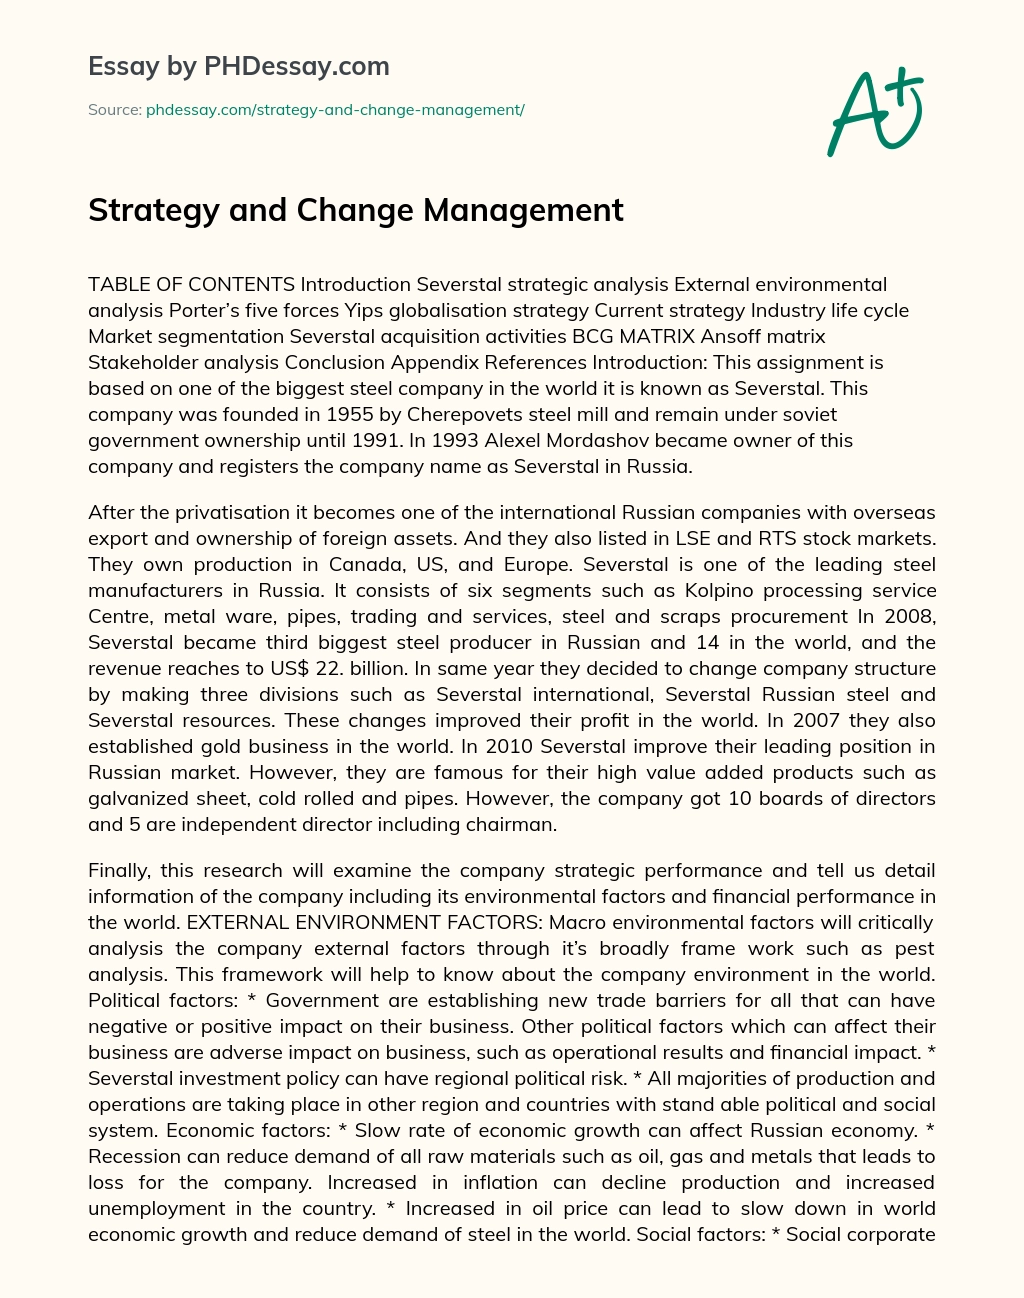 Strategy and Change Management essay